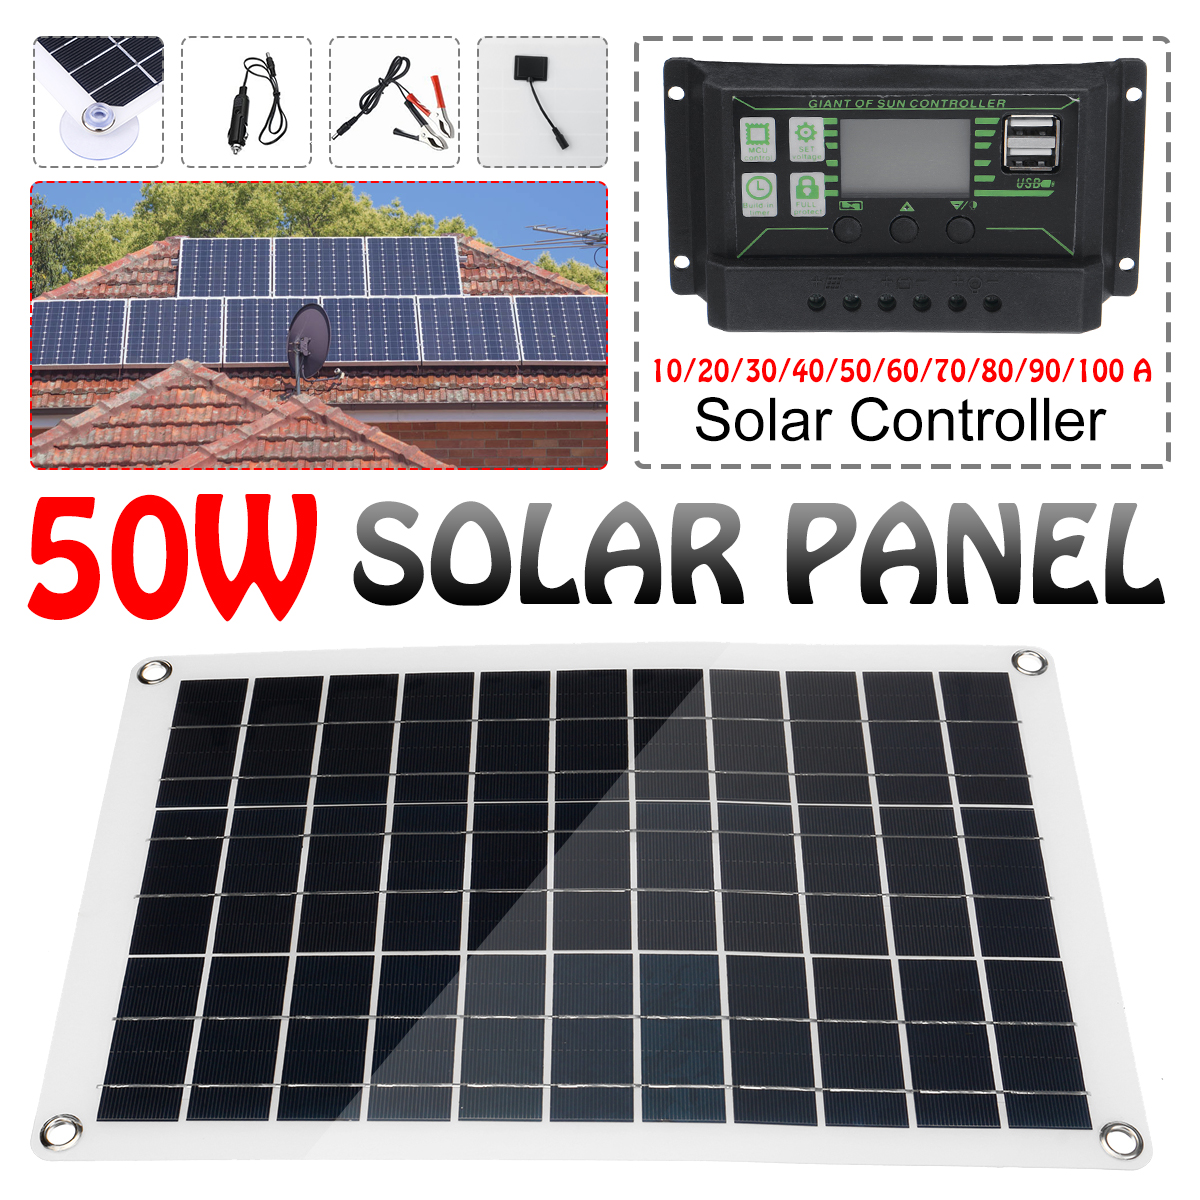 50W-Solar-Panel-Kit-MPPT-Solar-Charge-Cotroller-12V-Battery-Charger-10-100A-LCD-Controller-For-Phone-1839676-2